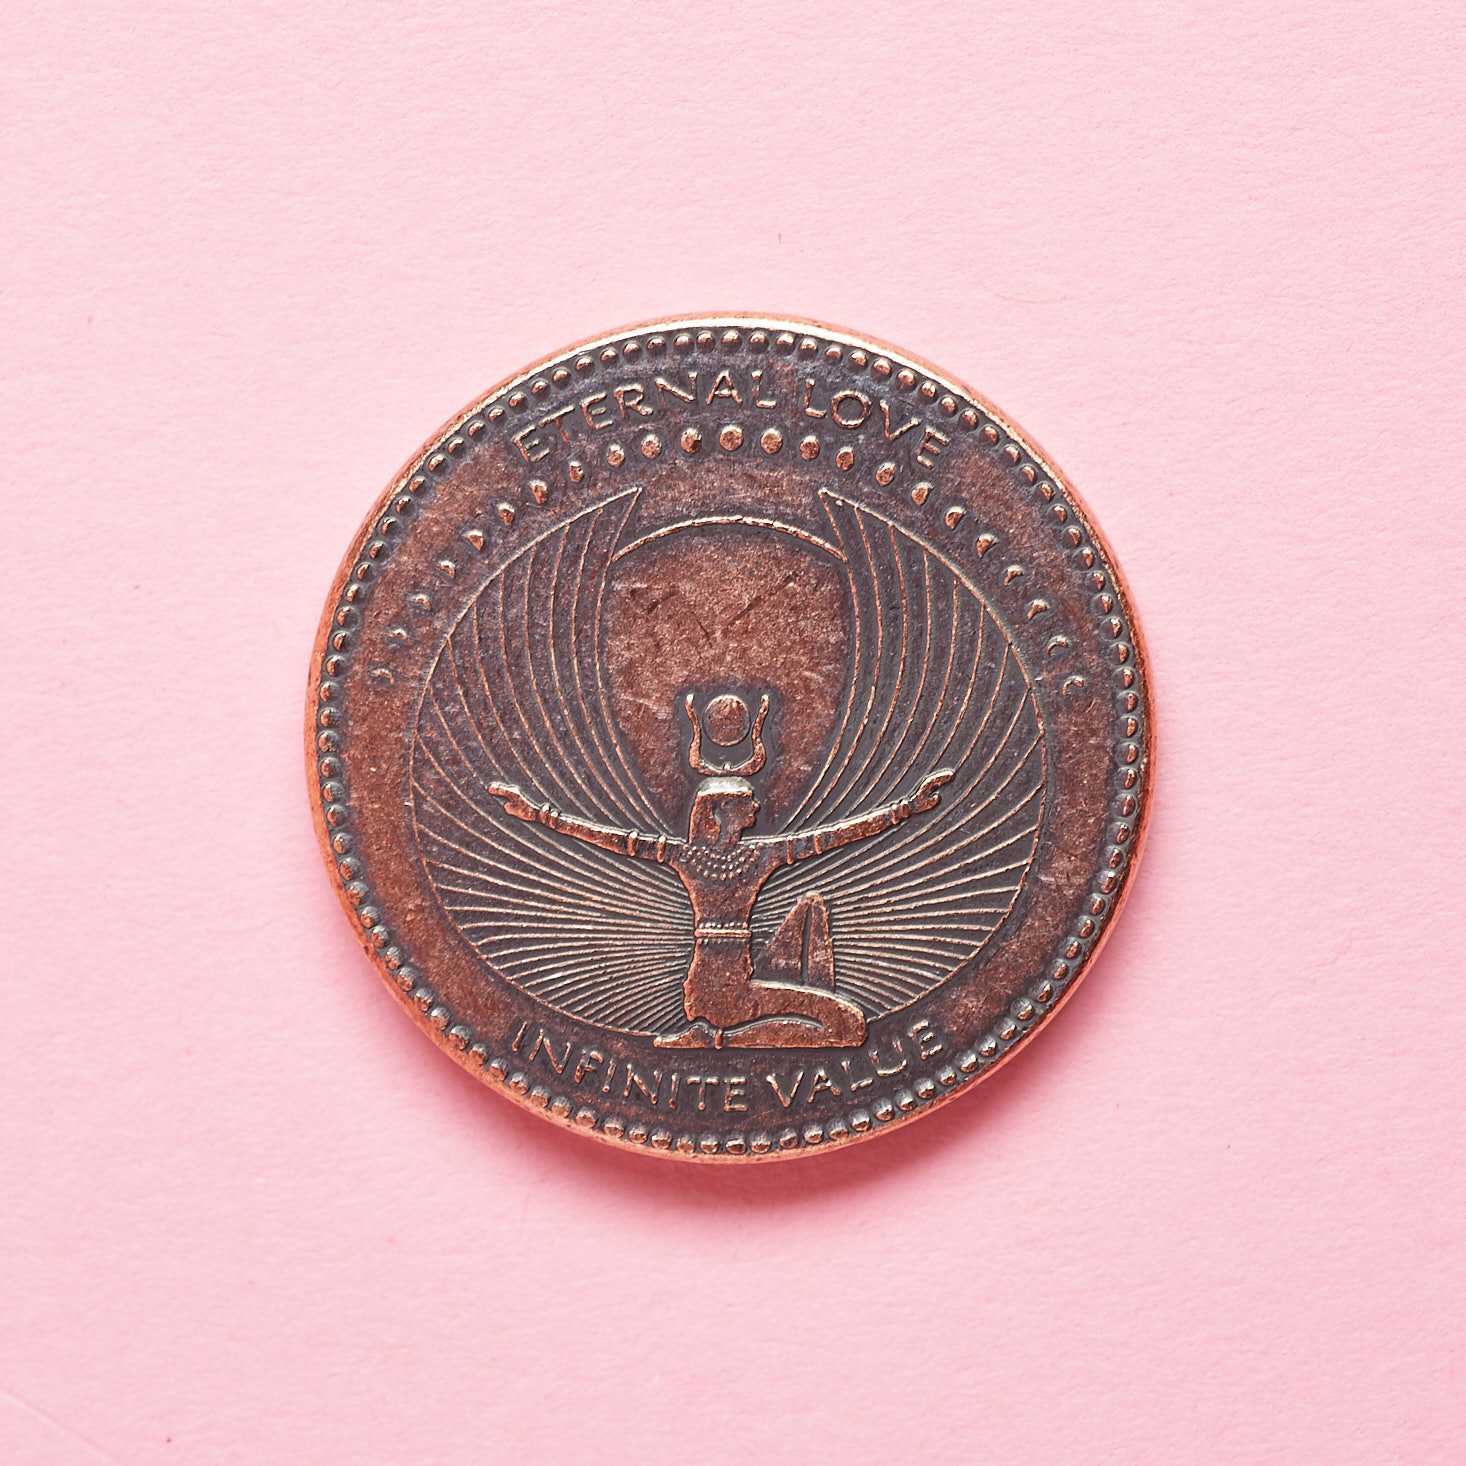 Goddess Provisions Divine Feminine May 2019 subscription box review coin back